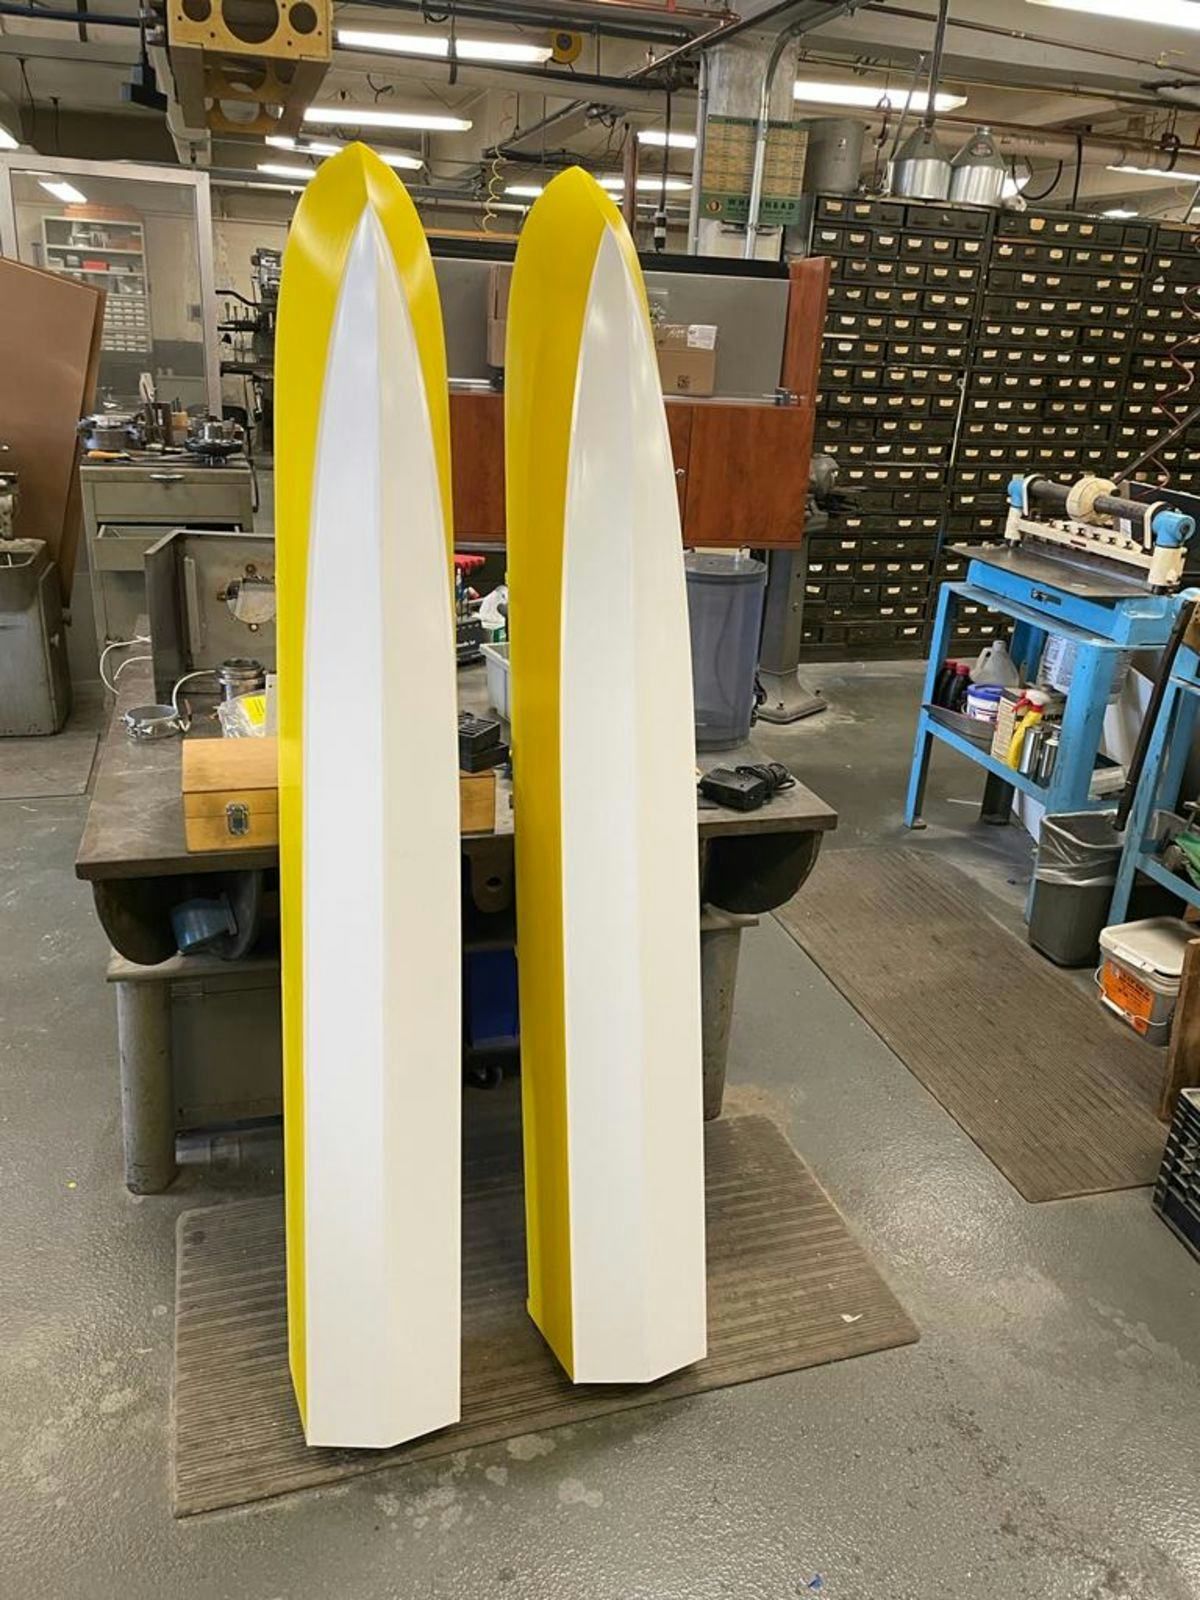 Two yellow hulls of a catamaran-style craft stacked in Stevens' Davidson Lab